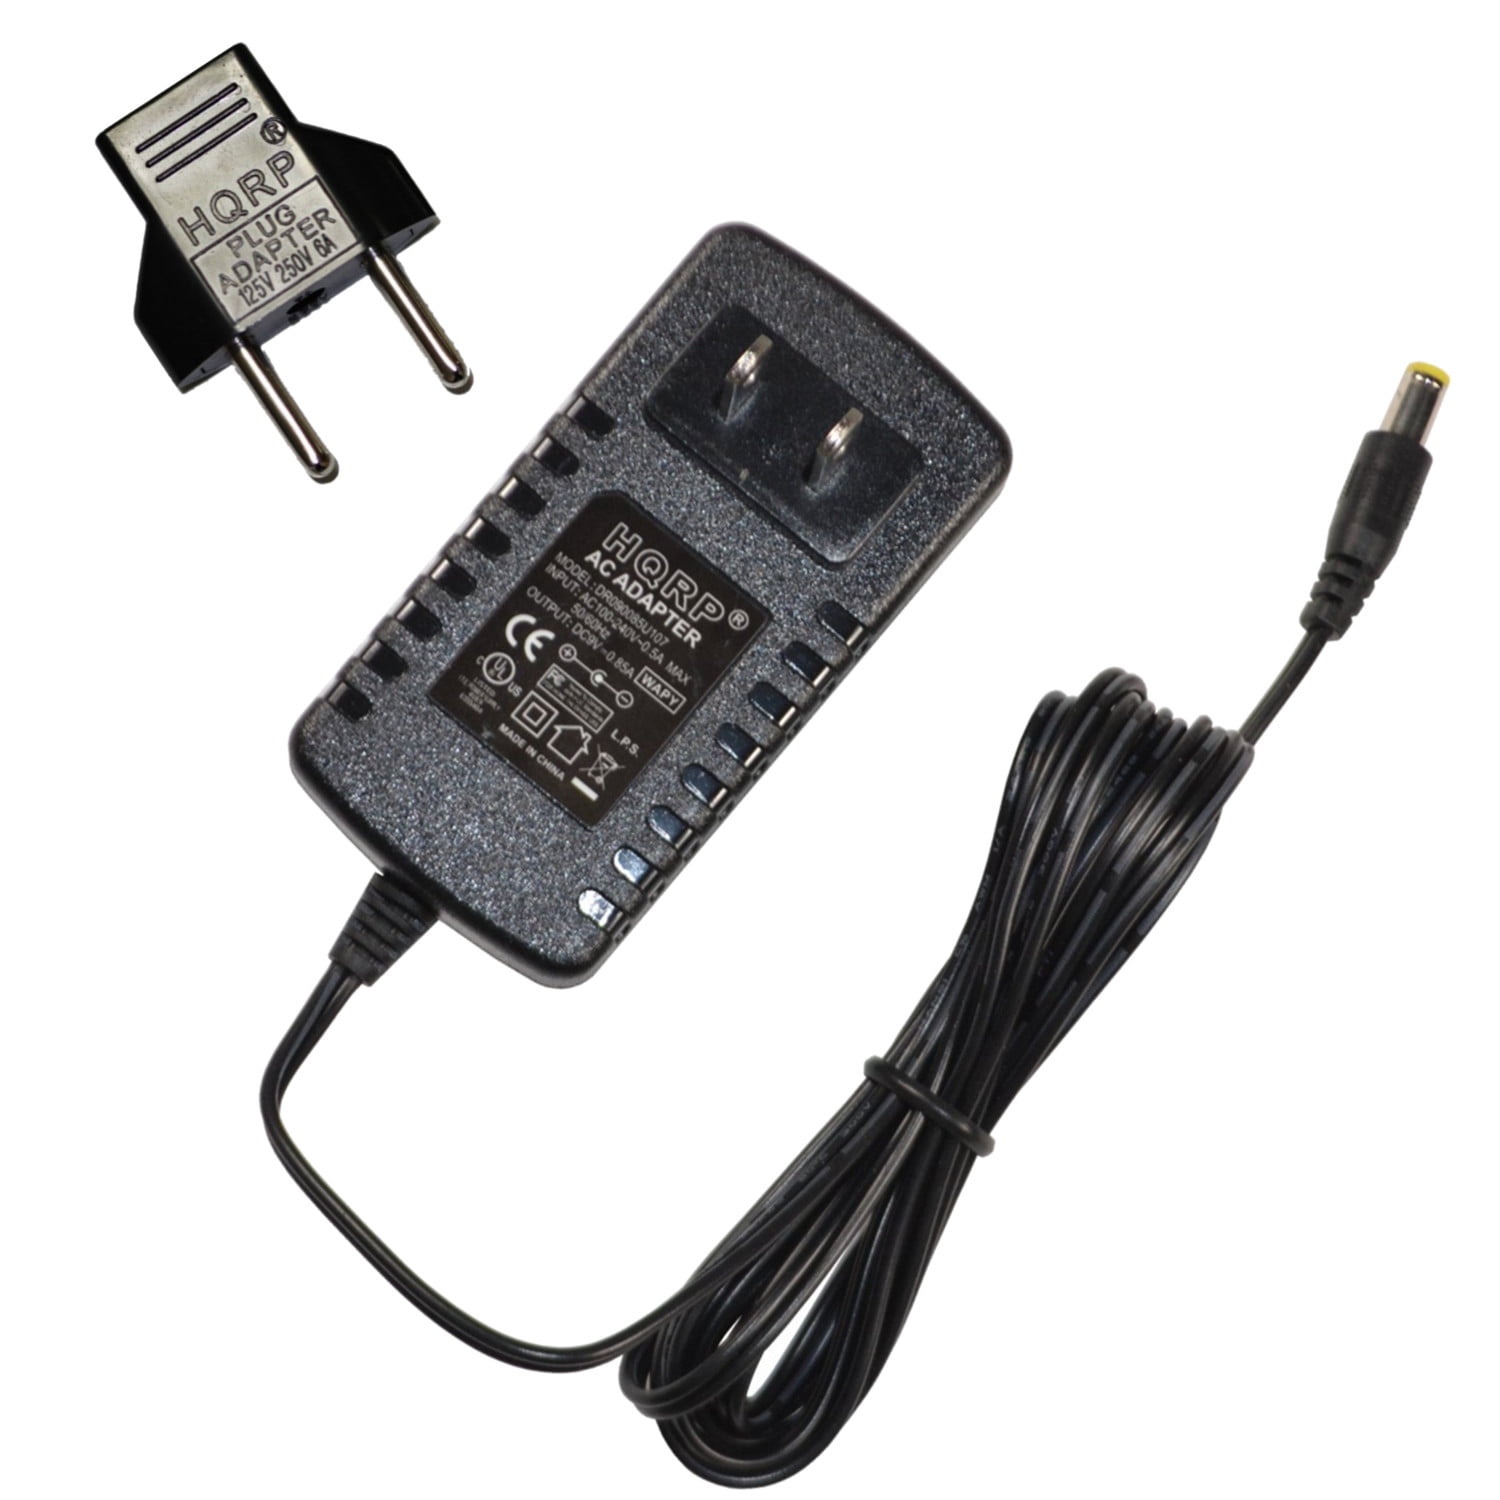 AC Adapter Power Supply for Casio CT-625 CT625 Keyboard